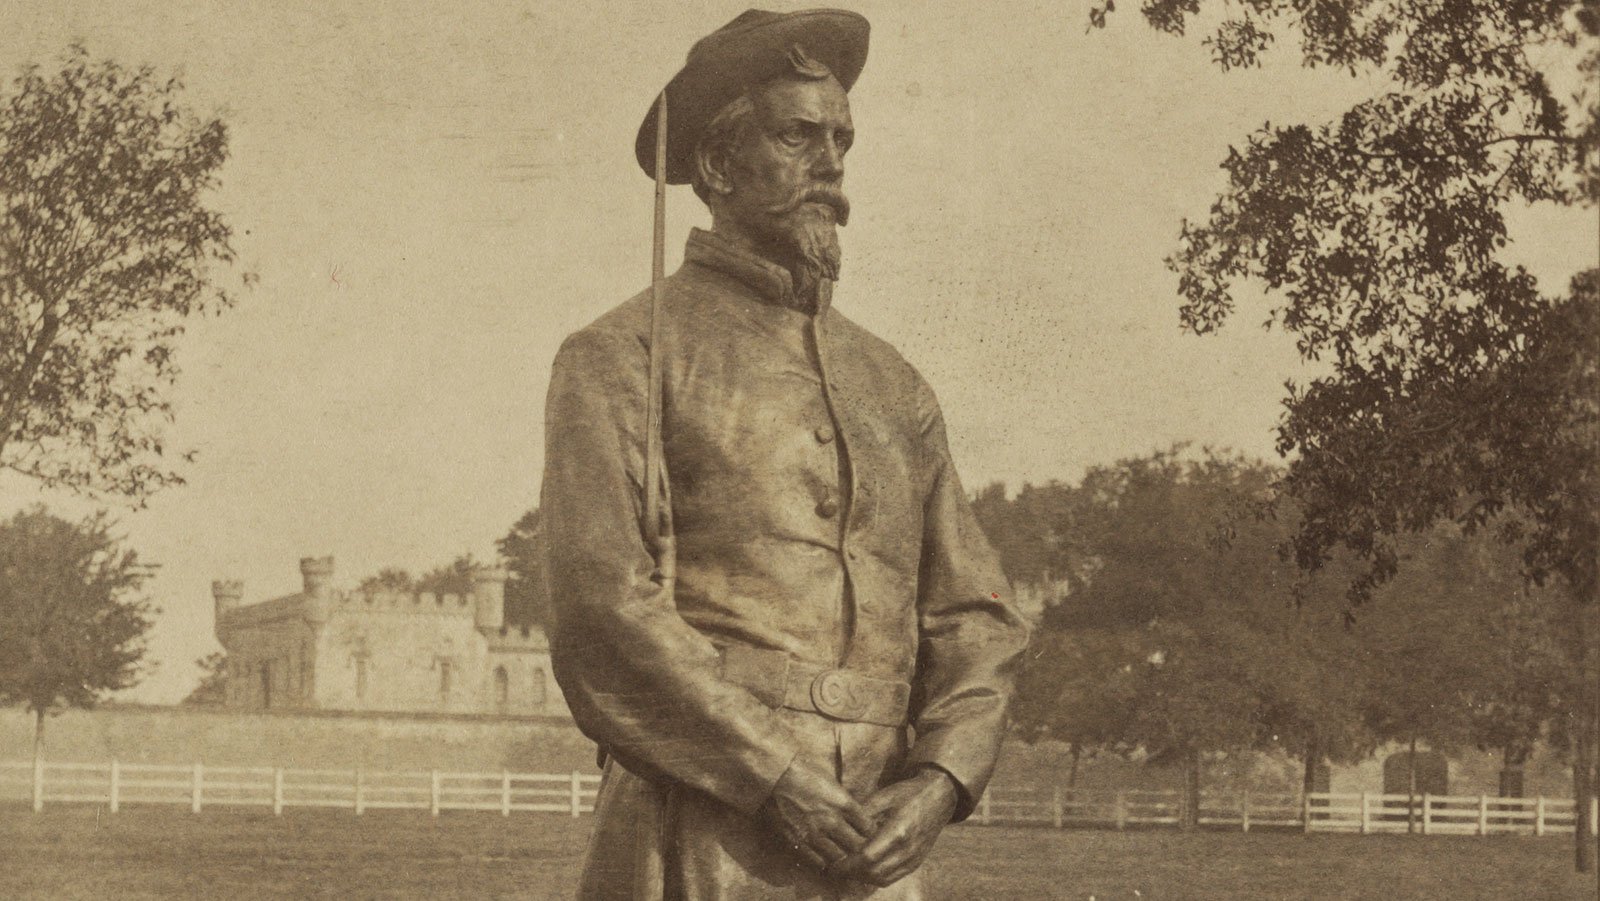 A standing Confederate soldier by sculptor David Richards